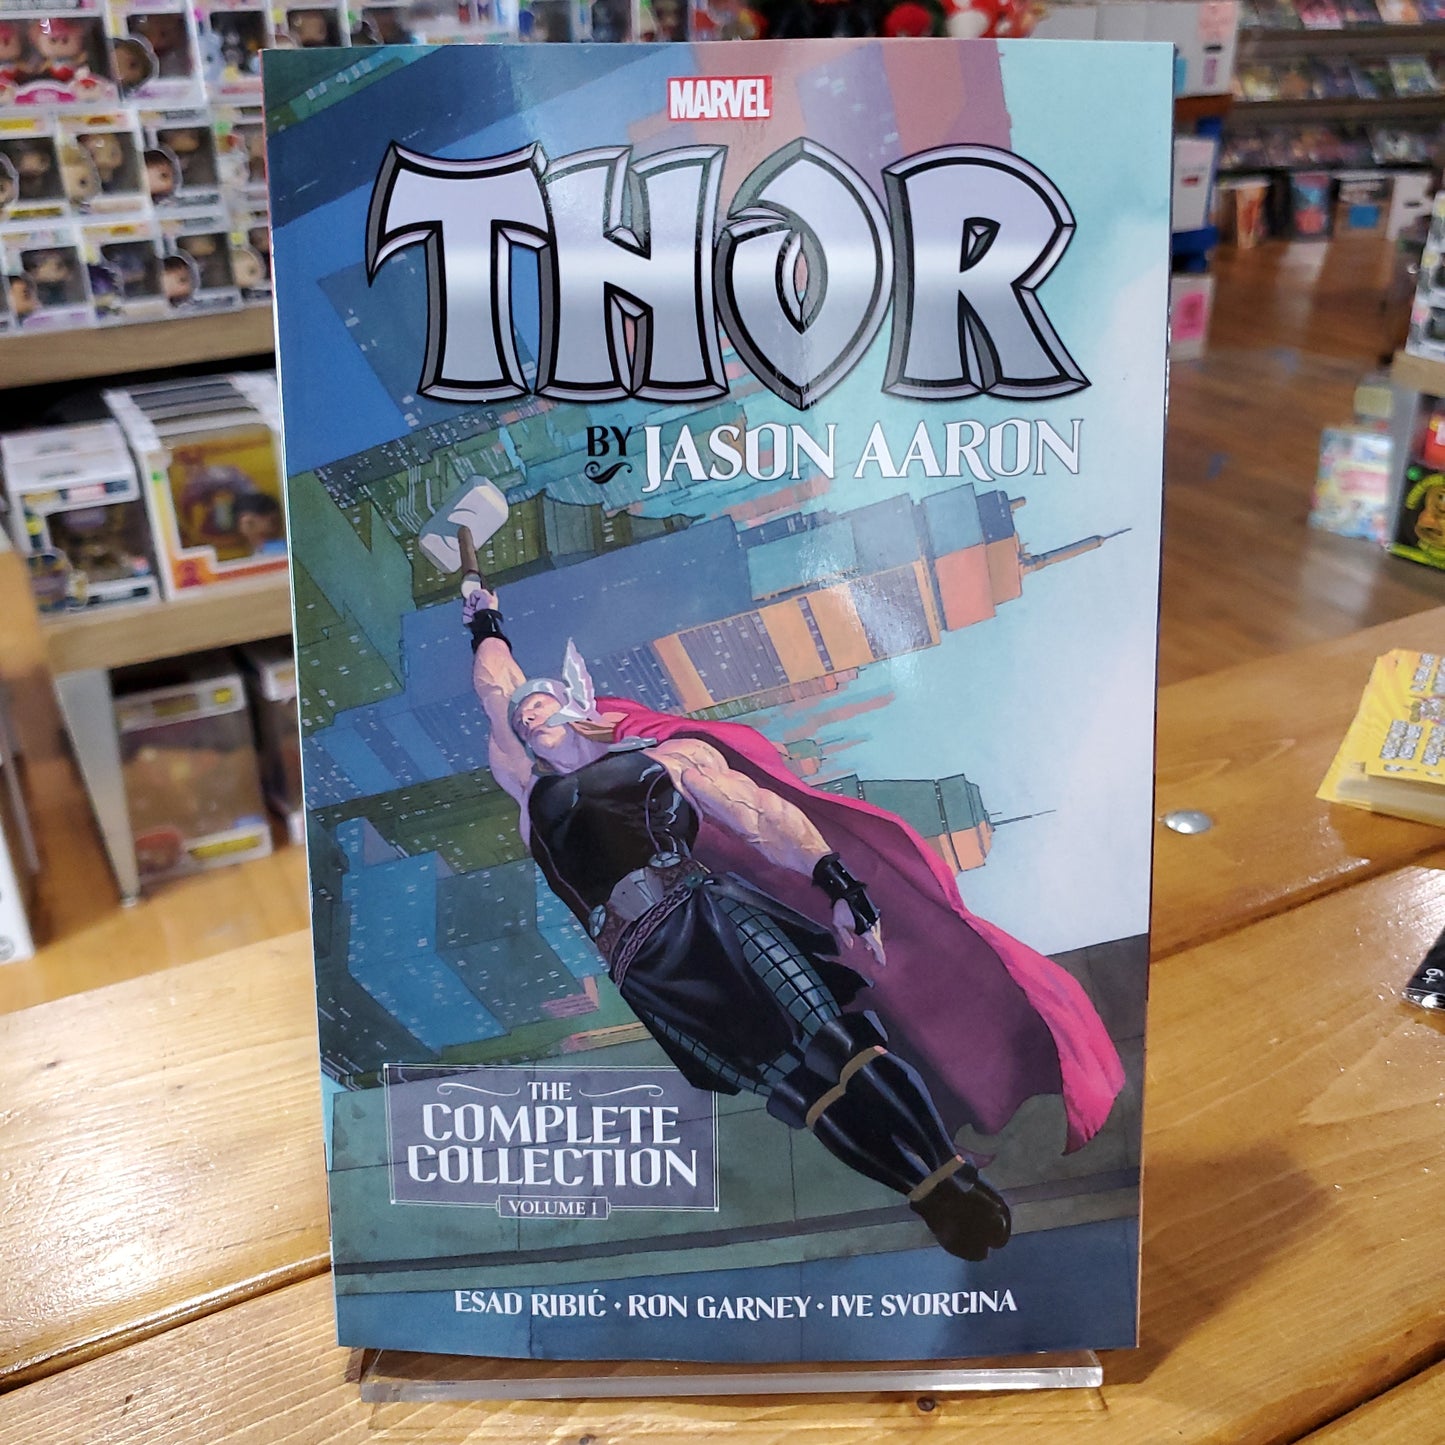 Marvel - Thor: The Complete Collection Volume 1- Graphic Novel